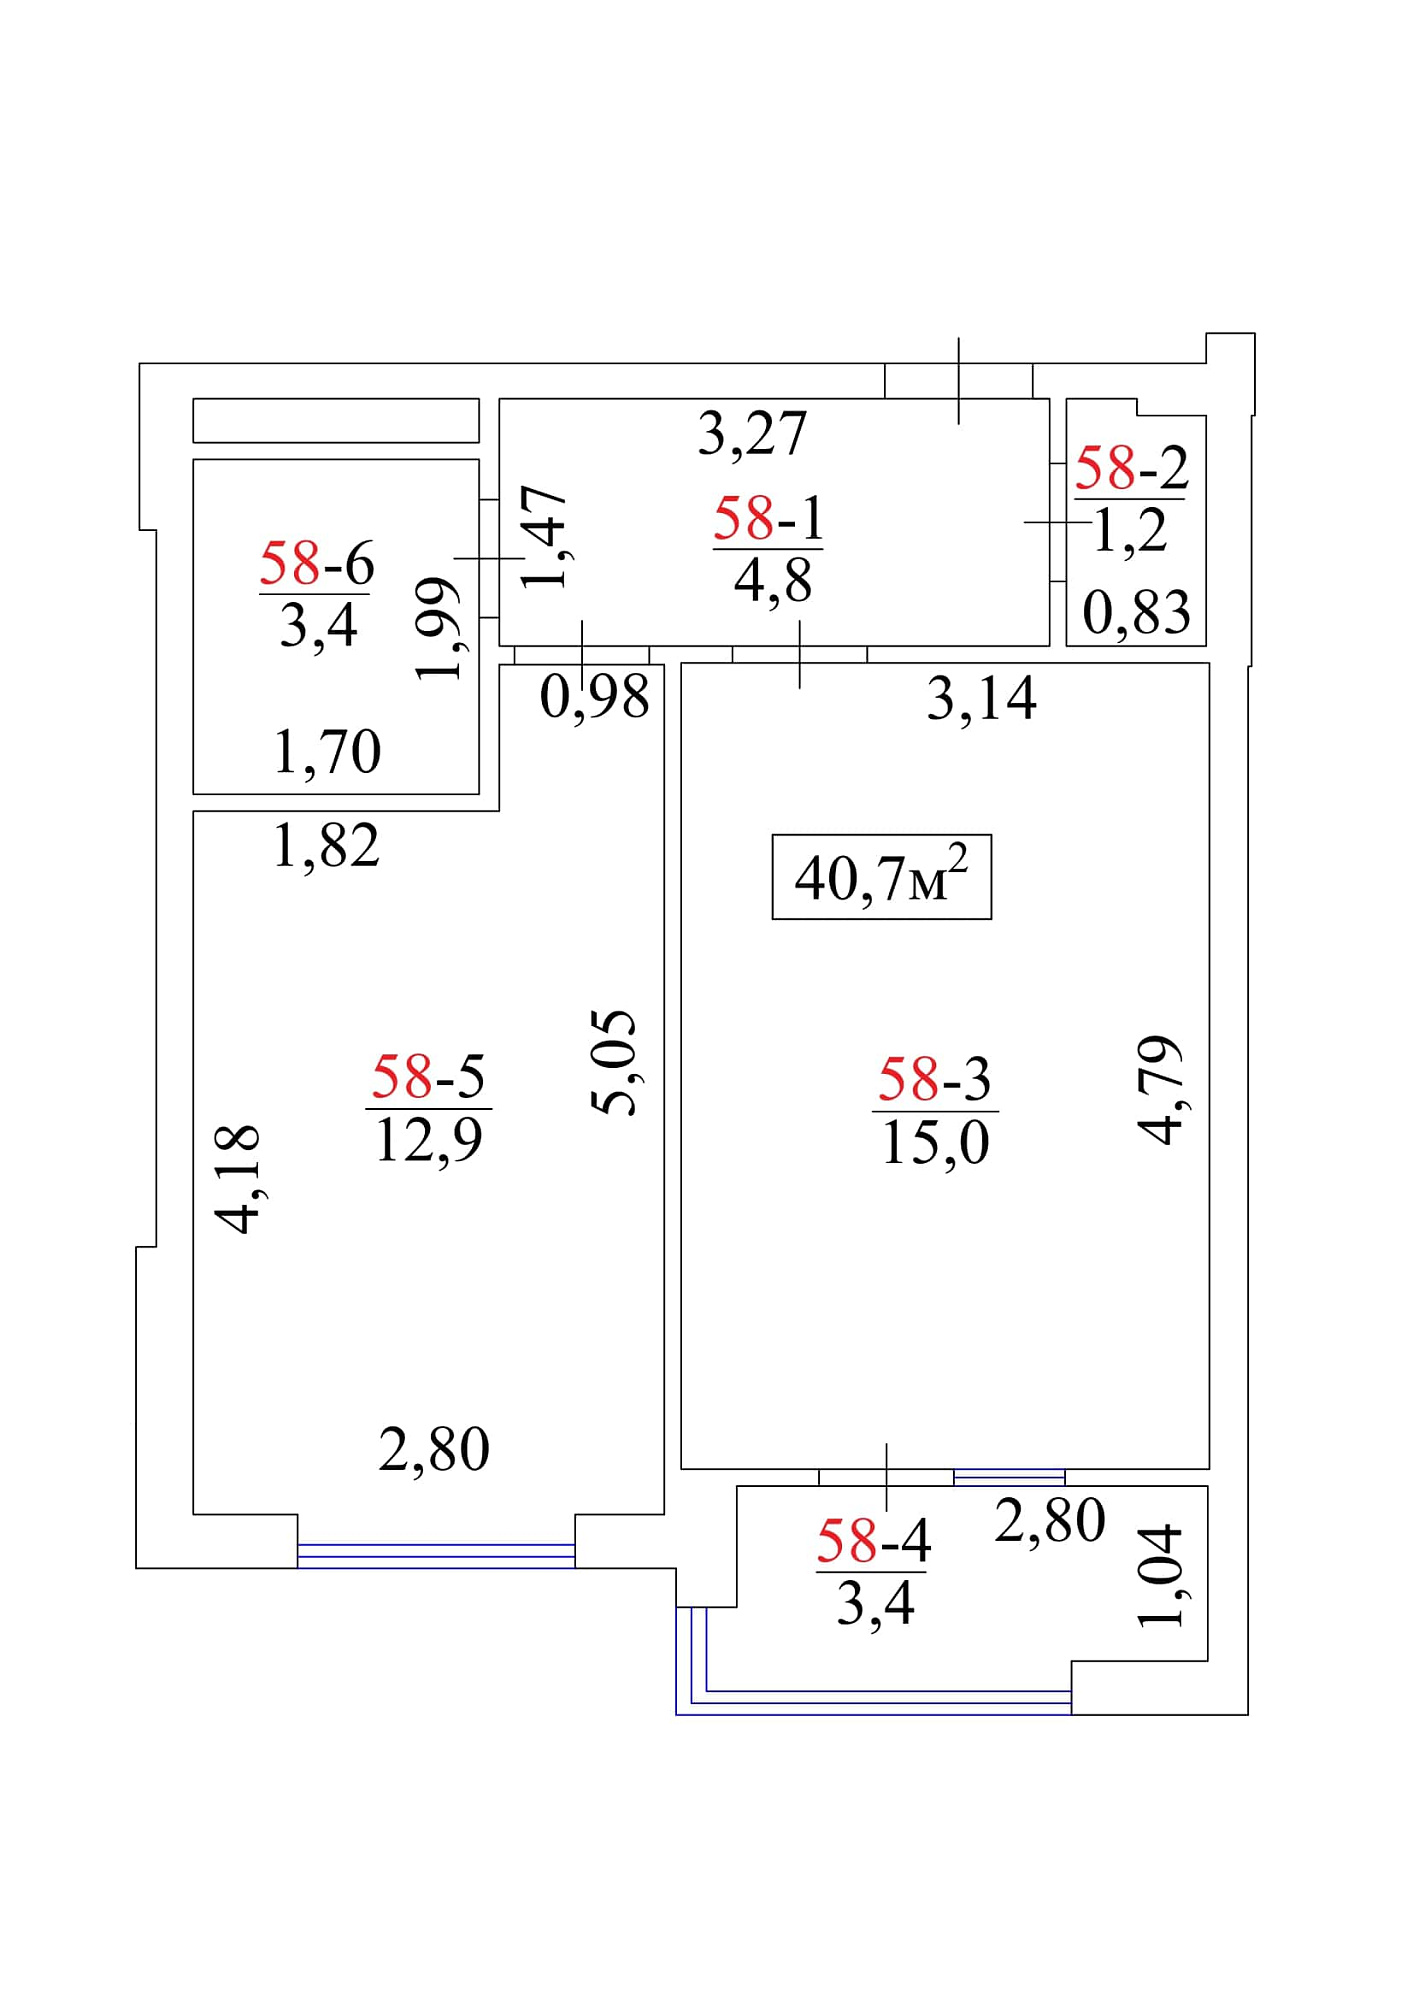 Planning 1-rm flats area 40.7m2, AB-01-07/00055.